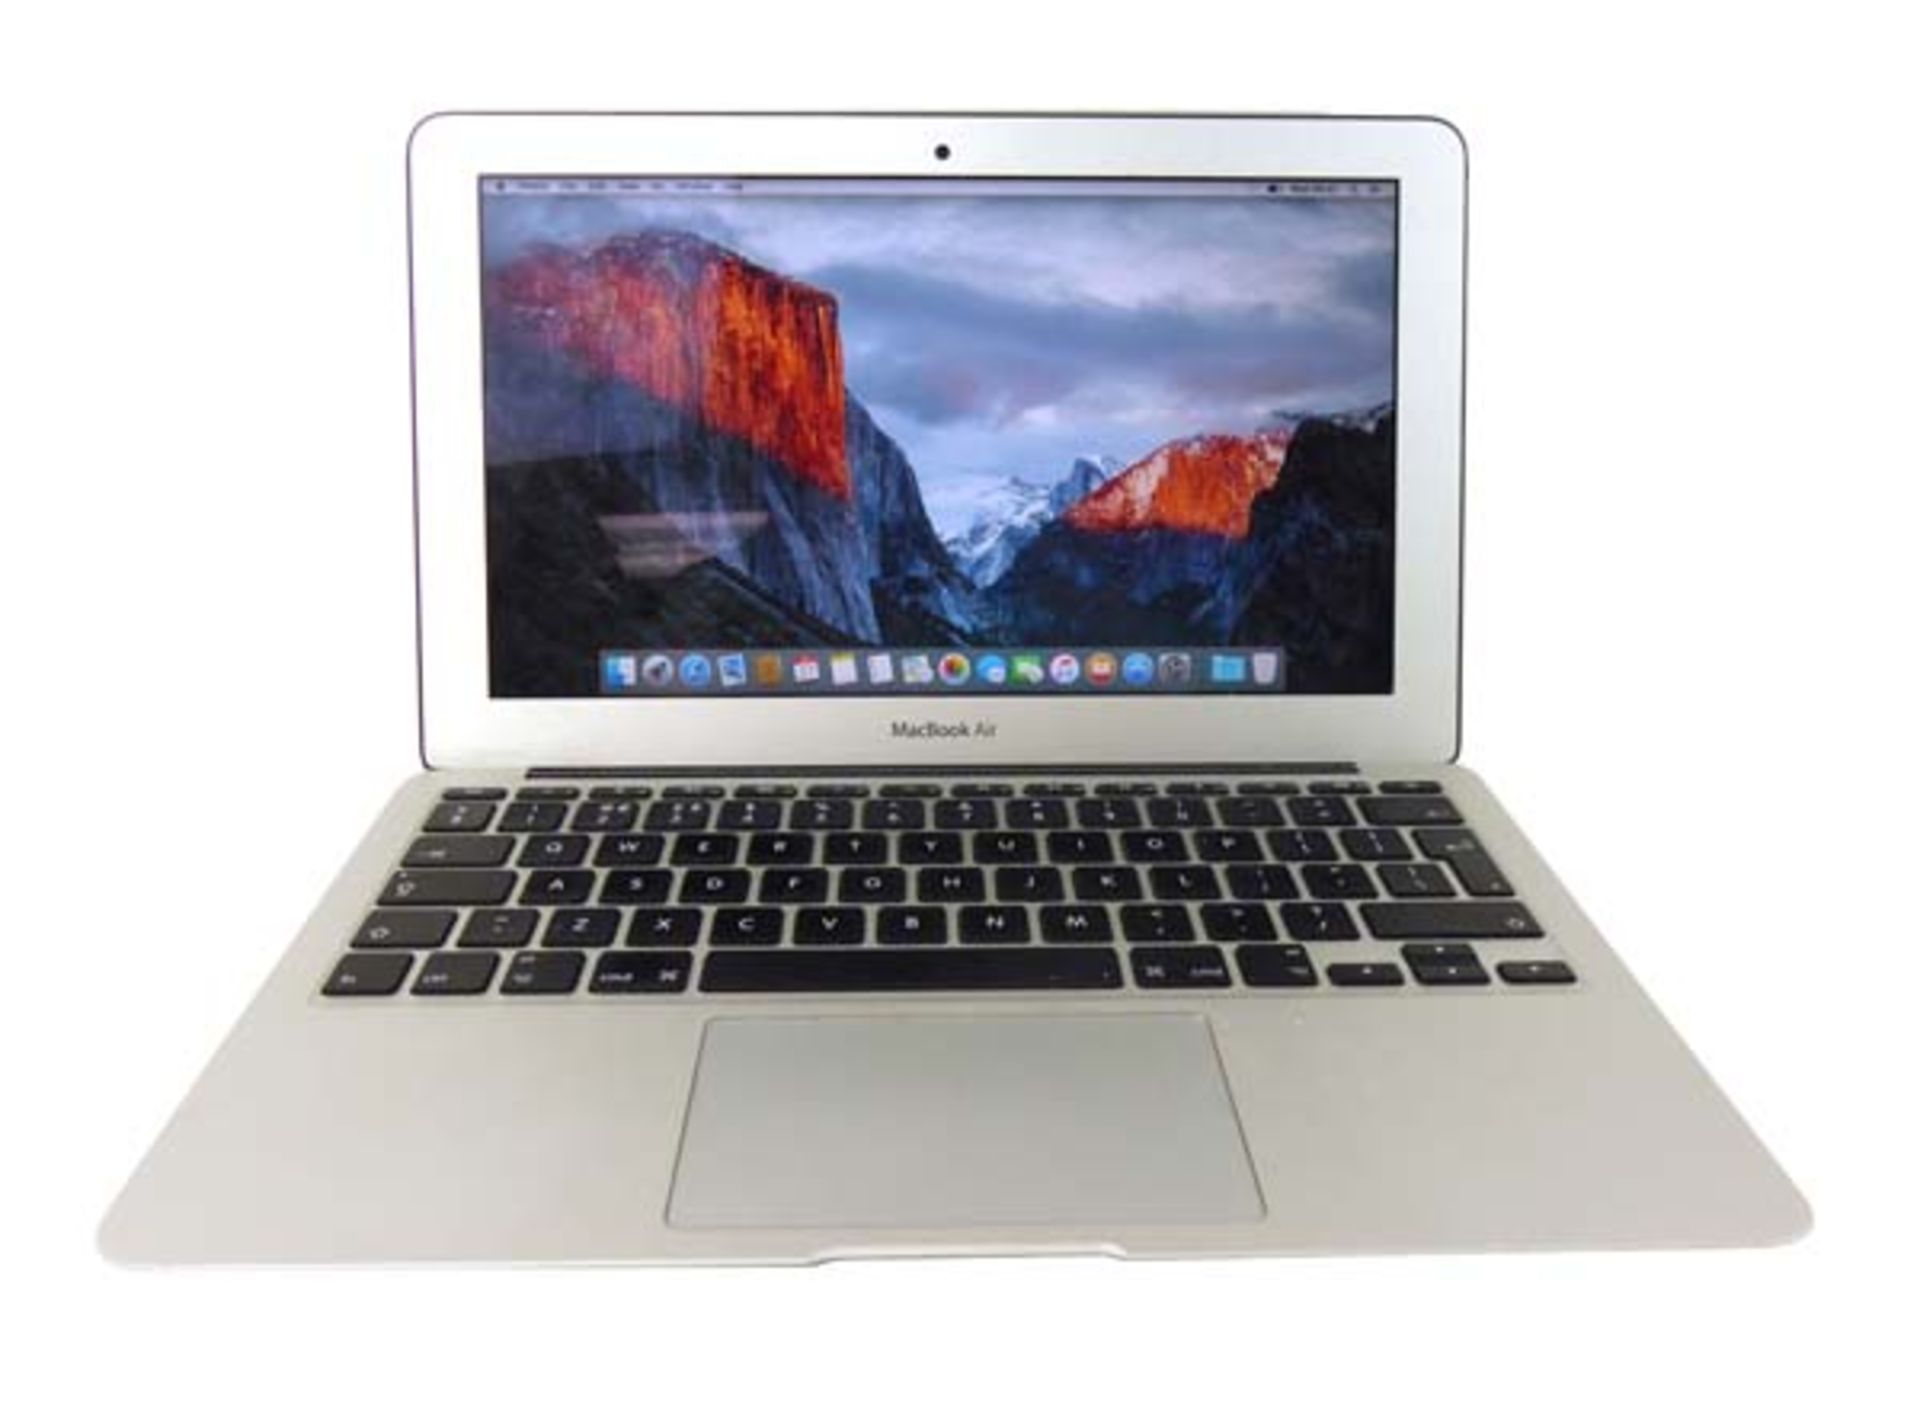 MacBook Air 11'' with 2.2GHz Core i7, 8GB RAM, 128GB SSD laptop (A1465 2015)